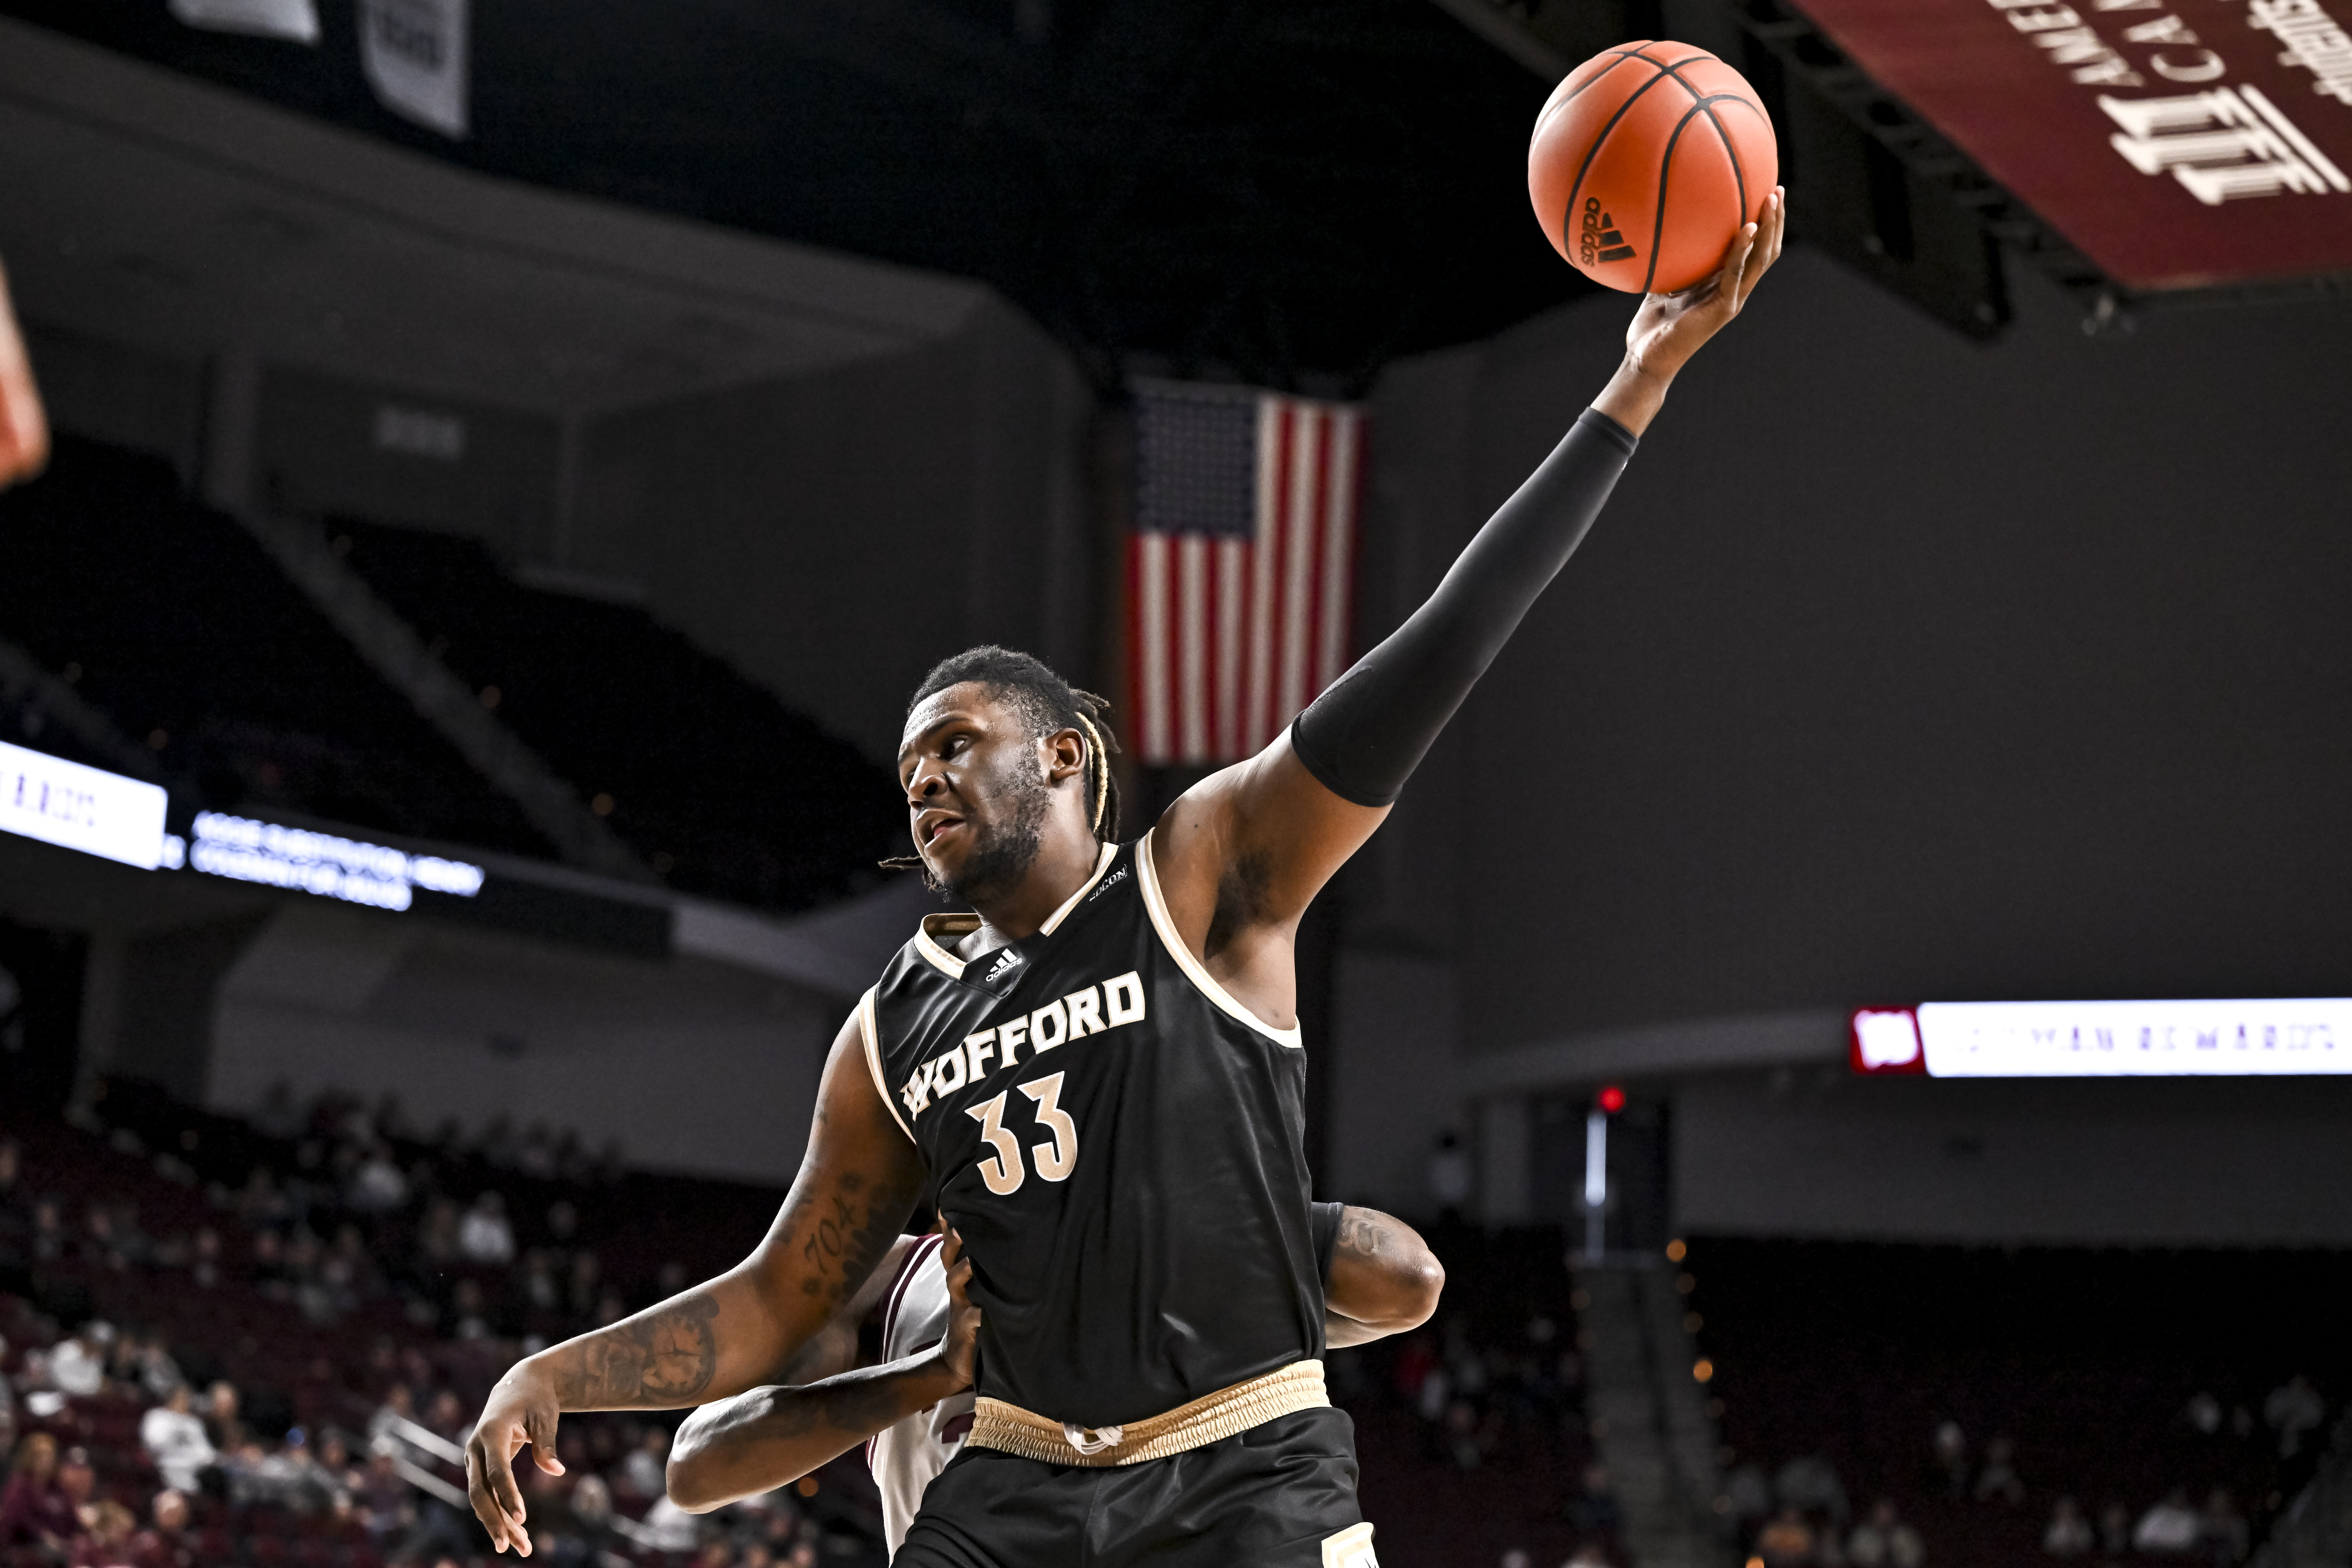 Wofford transfer BJ Mack includes LSU in top 5